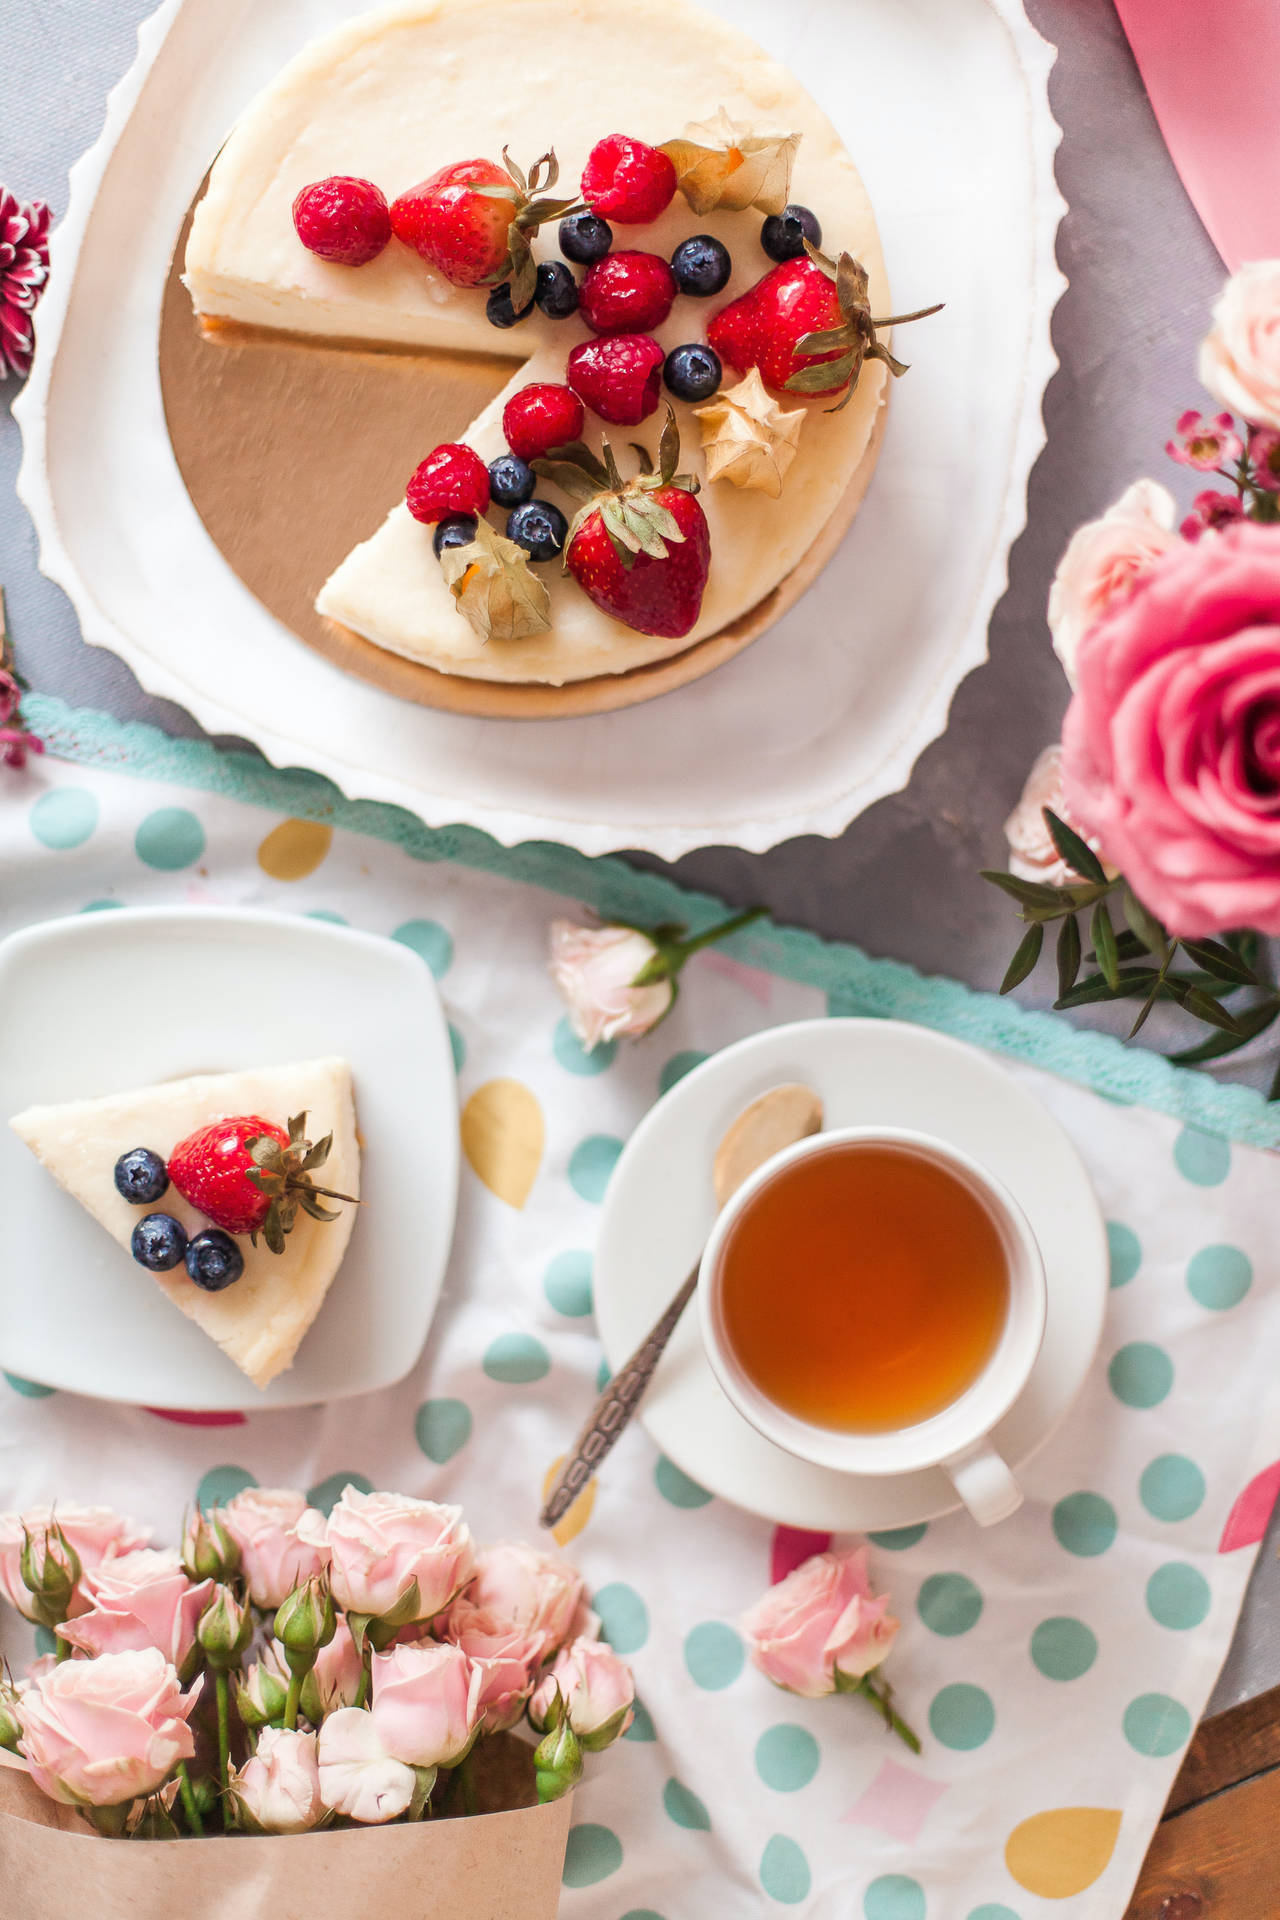 Delicious Mixed Berries Cheesecake With A Cup Of Tea Background